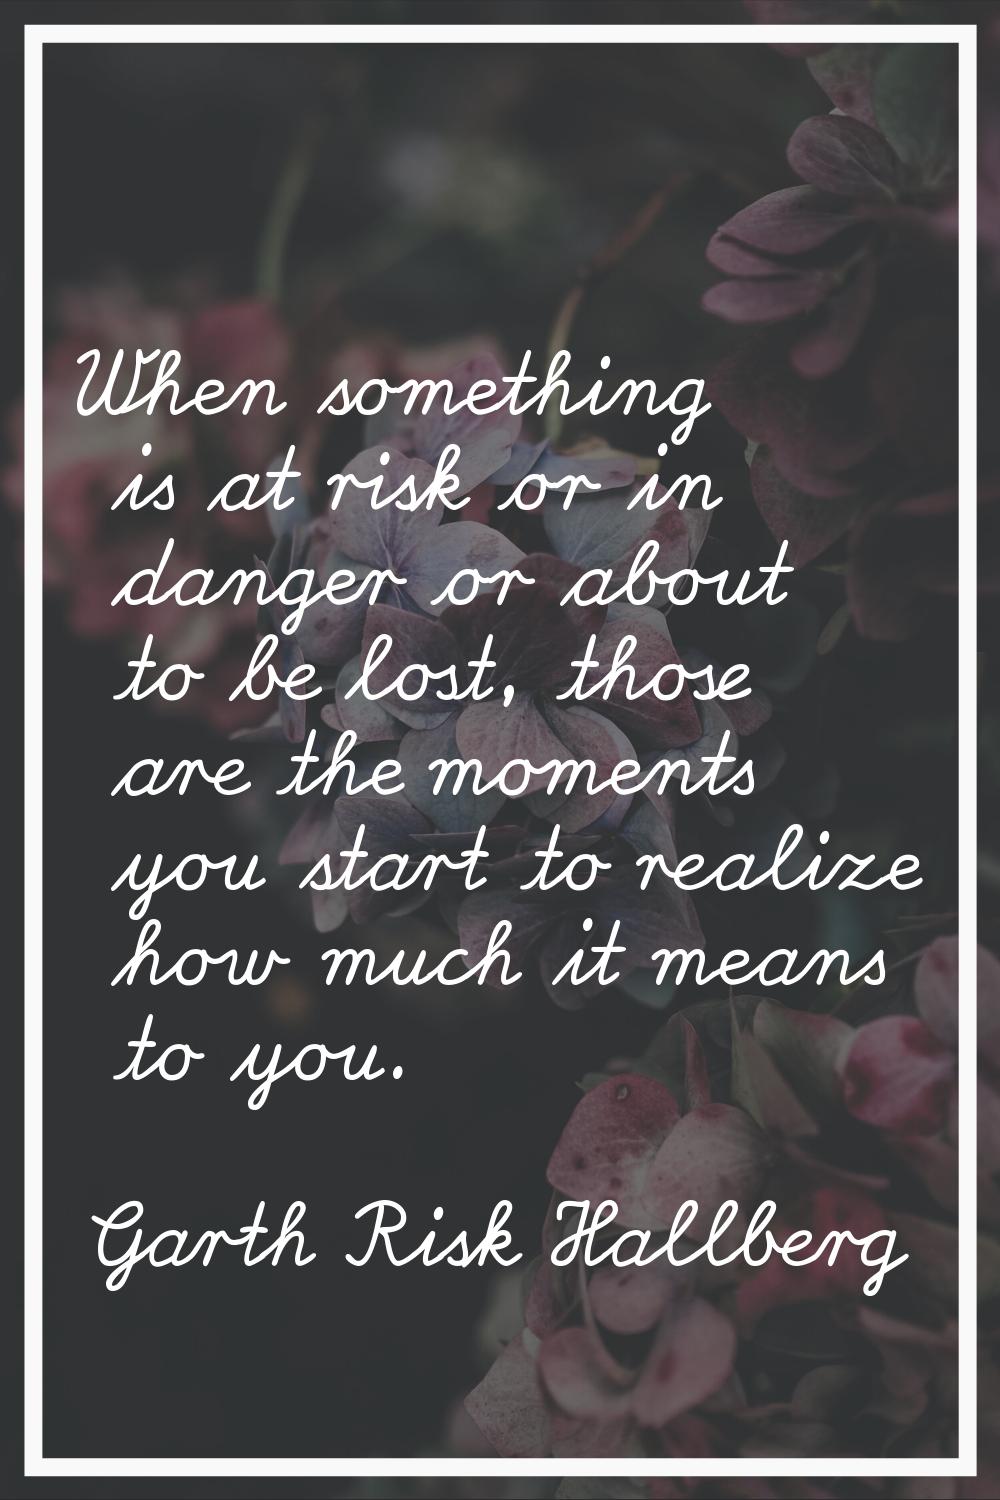 When something is at risk or in danger or about to be lost, those are the moments you start to real